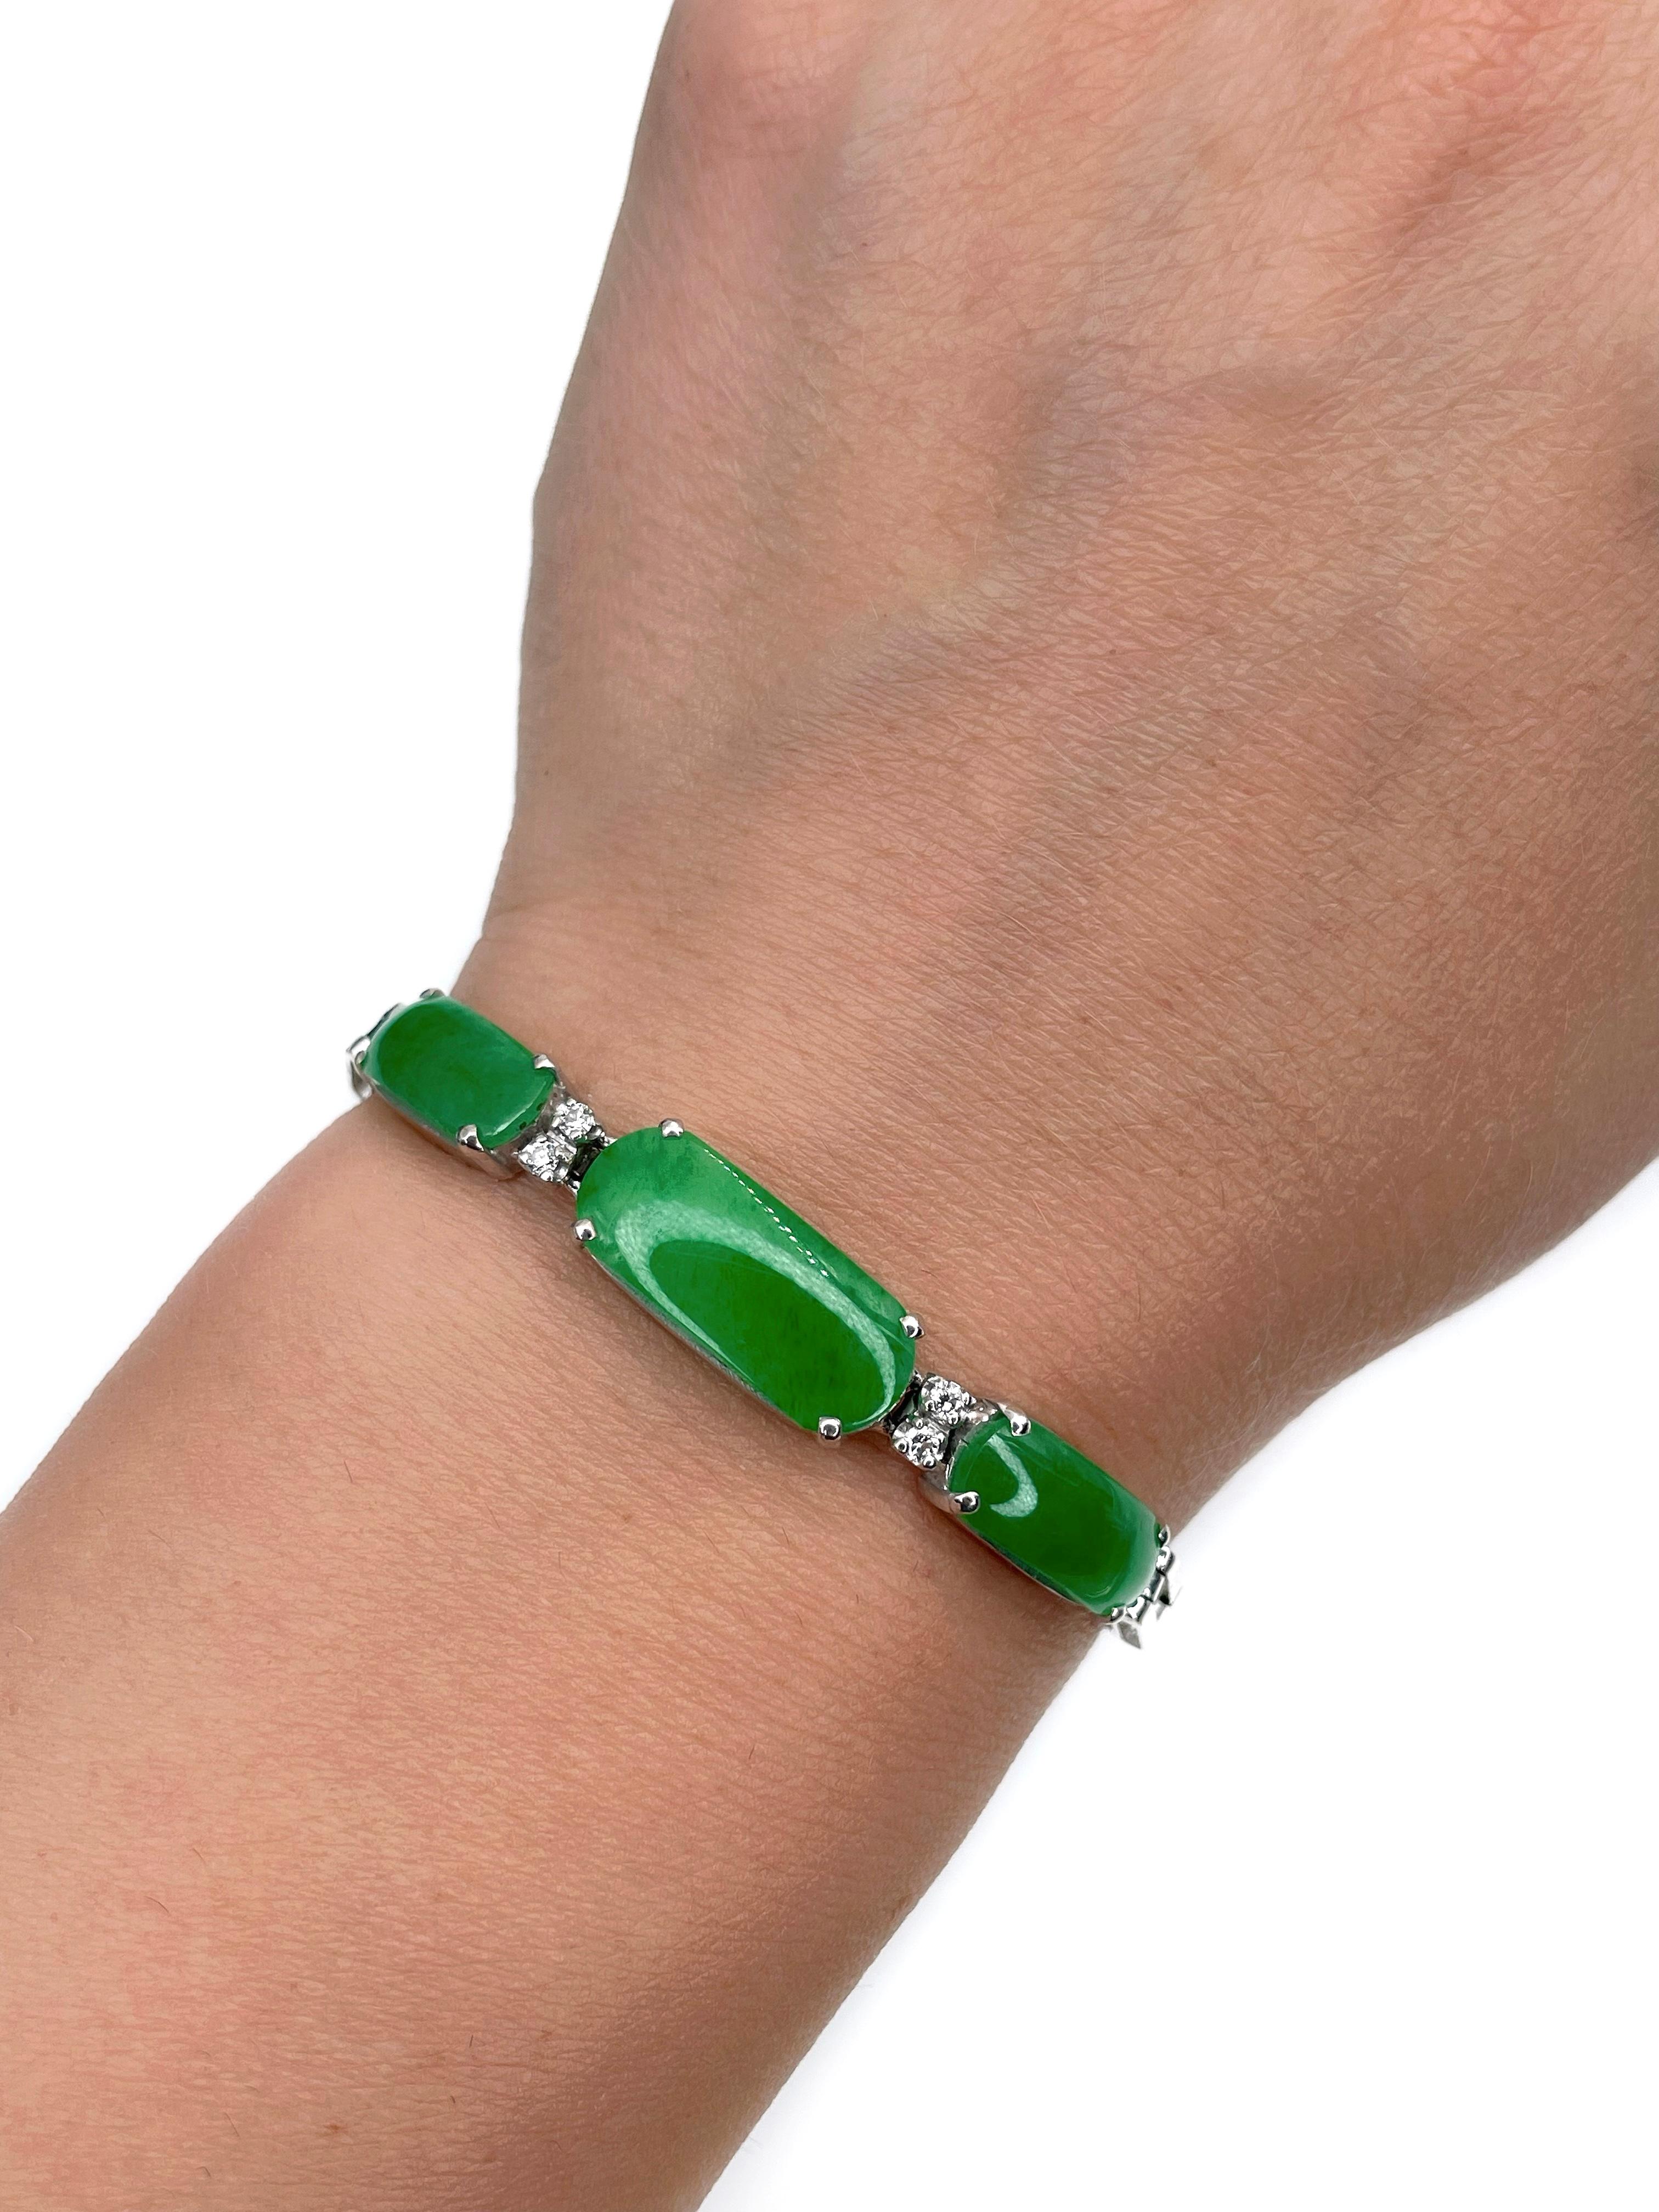 IMPORTANT: it is suitable for a narrow wrist - length 15.5cm 

This is a beautiful vintage chain bracelet crafted in 18K white  gold. Circa 1960. 

The piece features:
- jades: 3pcs., cabochon cut, apple green
- diamonds: 4pcs., round brilliant cut,